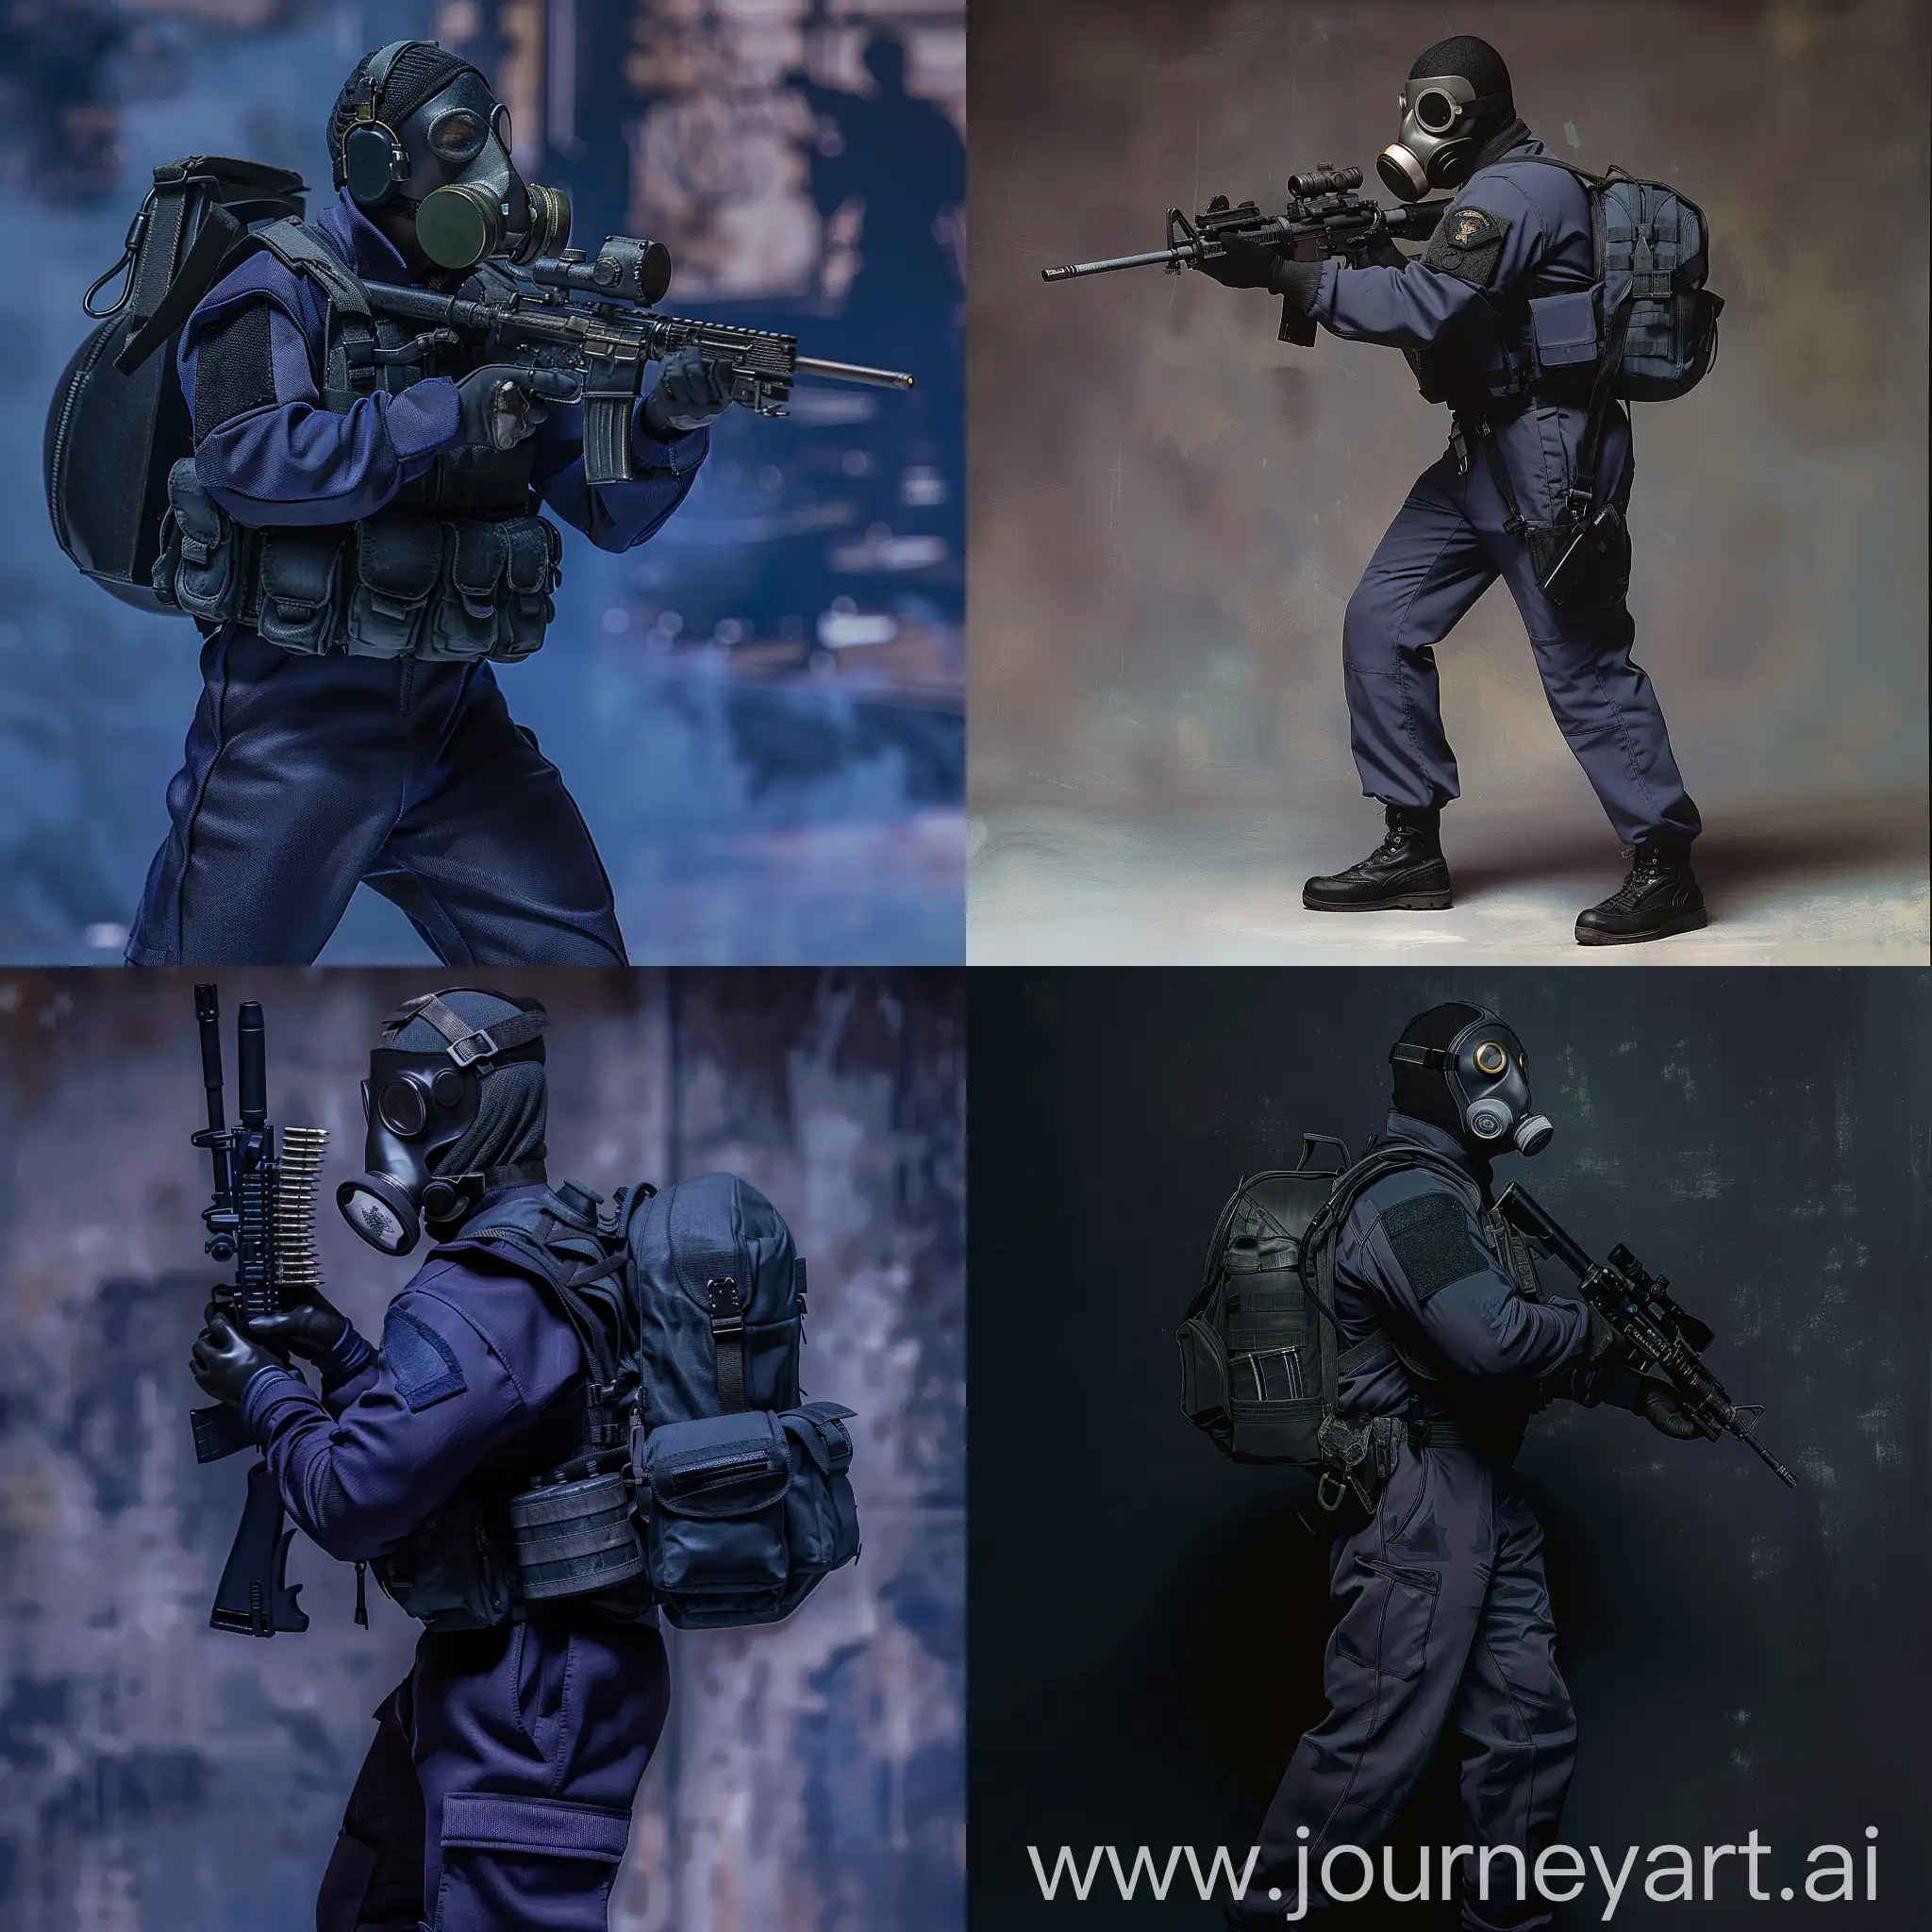 1978 year, SAS operator, dark purple military jumpsuit, hazmat protective gasmask on his face, small military backpack, military unloading on his body, sniper rifle in his hands.